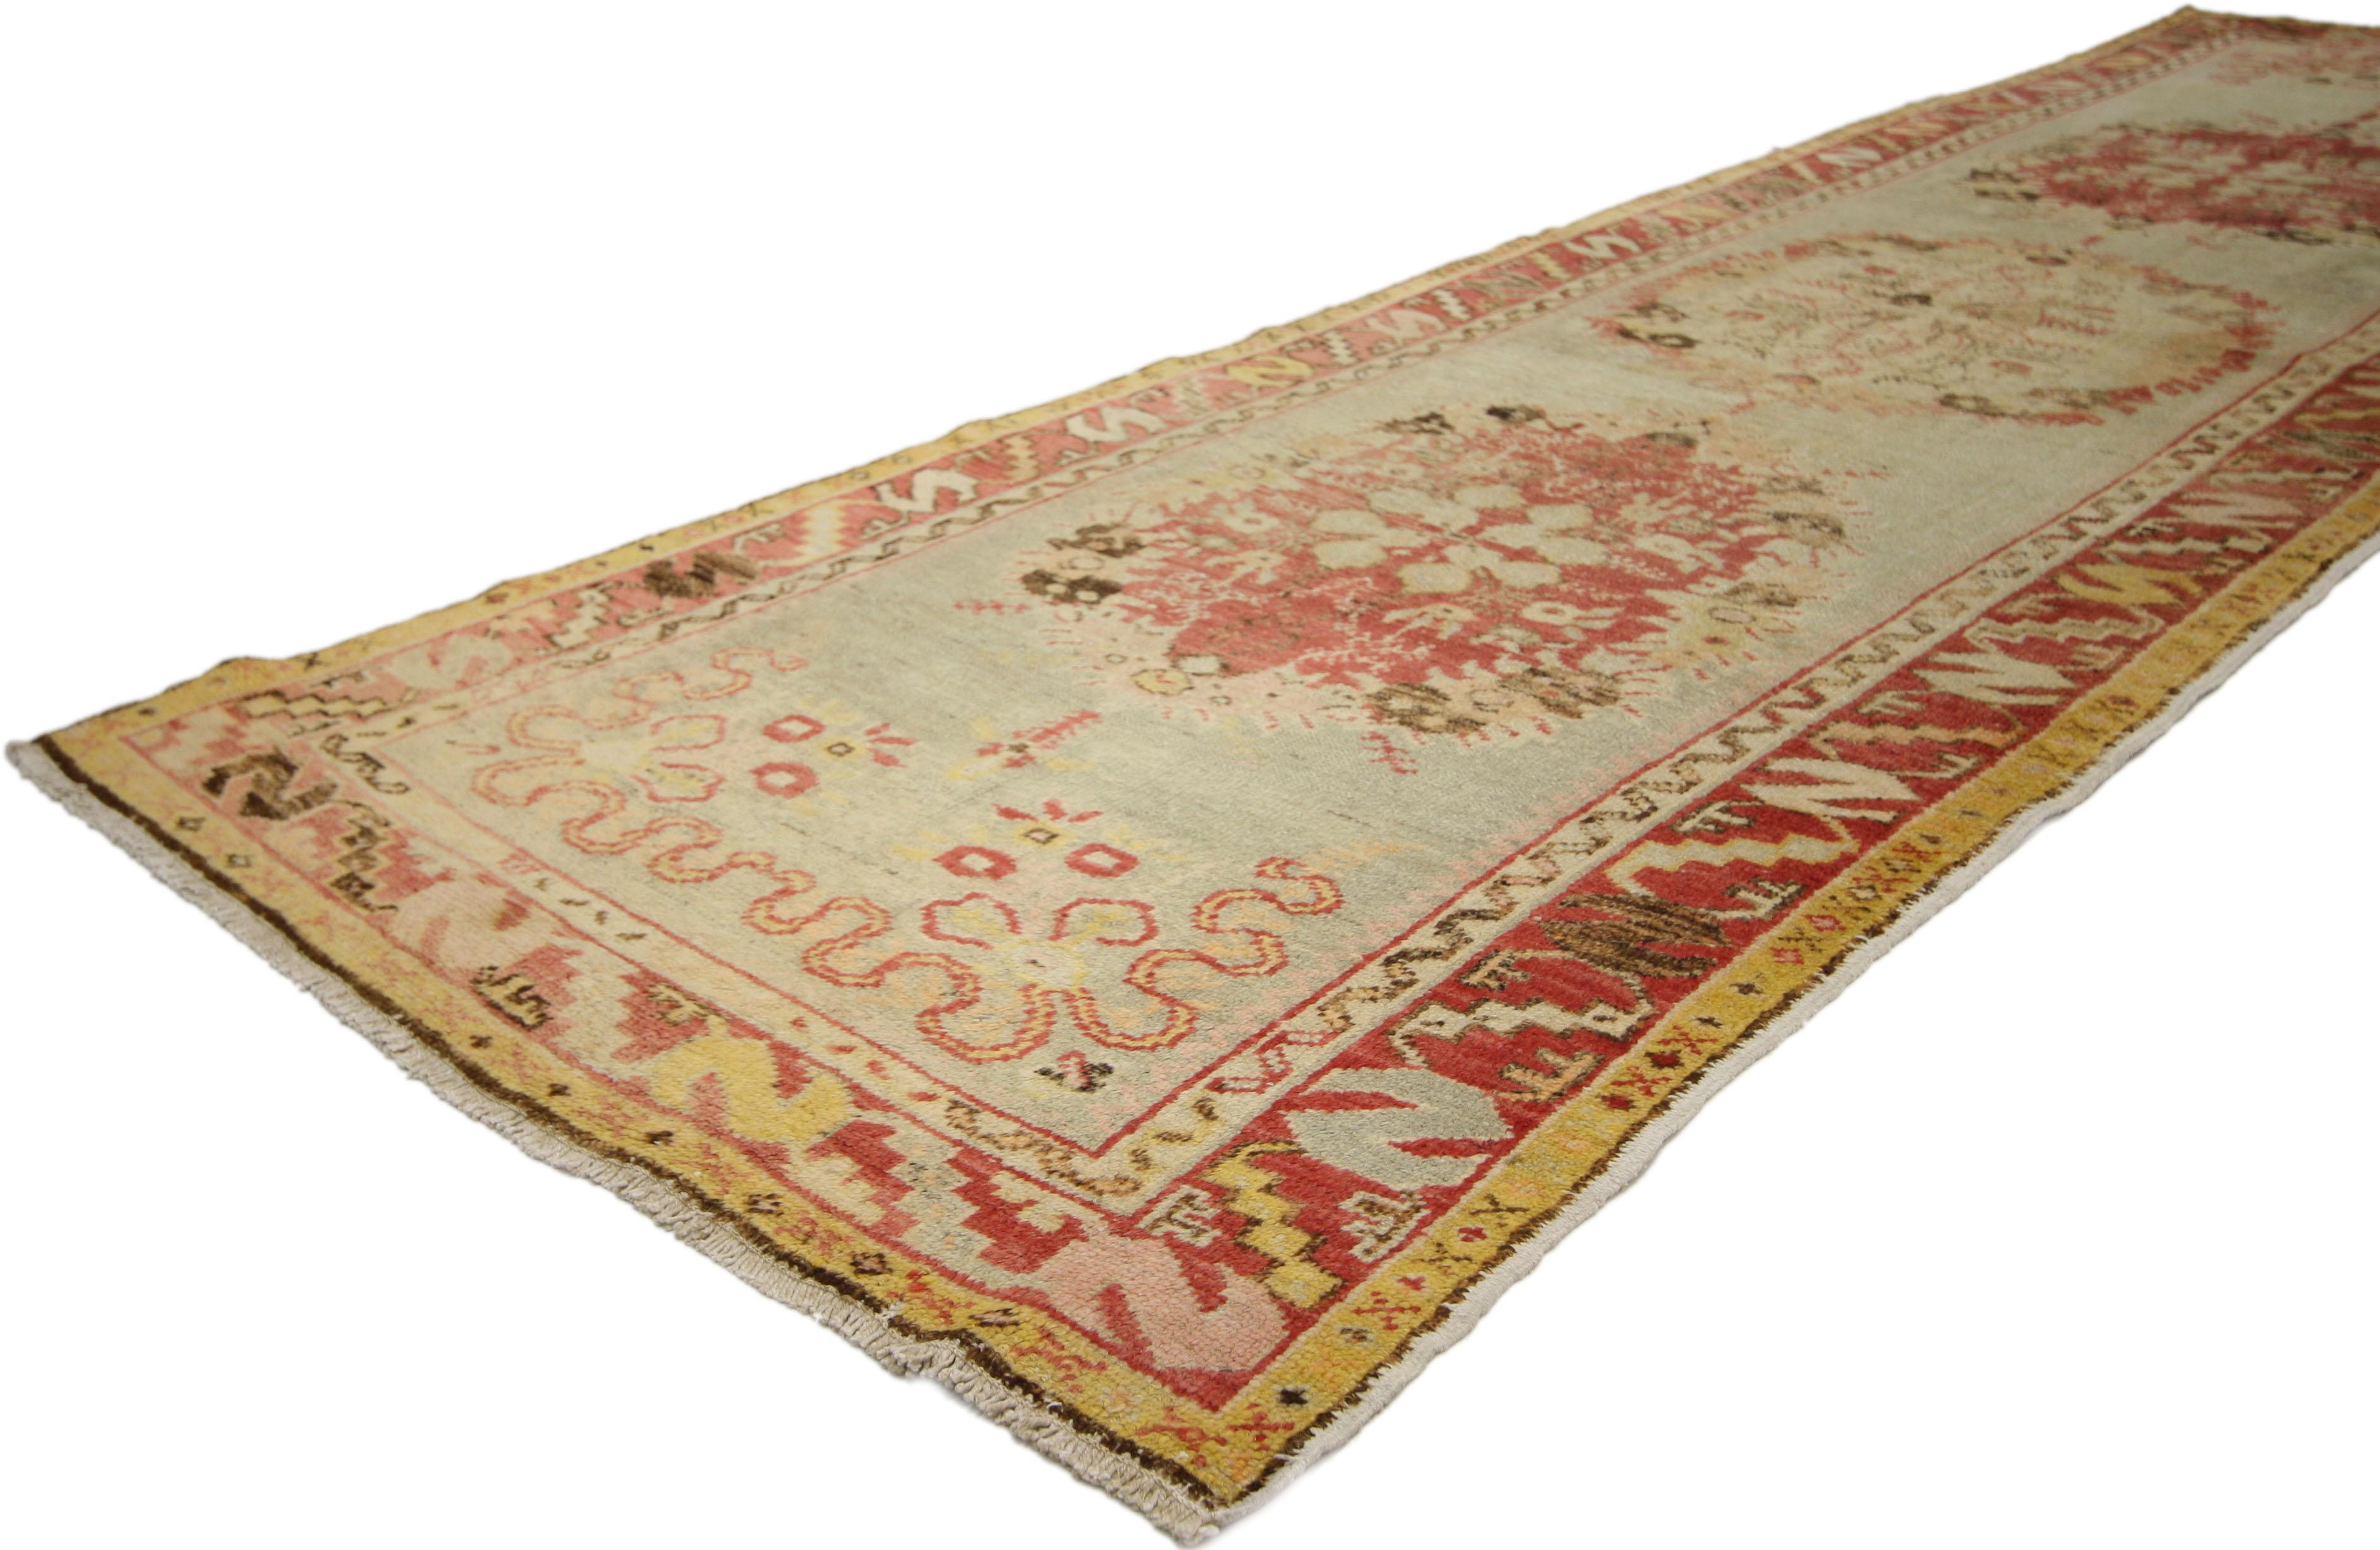 50361 Distressed Vintage Turkish Oushak Runner with Romantic French Country Style 03’03 x 10’10. French Country and Romantic Rusticity meets timeless Anatolian tradition in this hand knotted wool distressed vintage Turkish Oushak runner. Set with